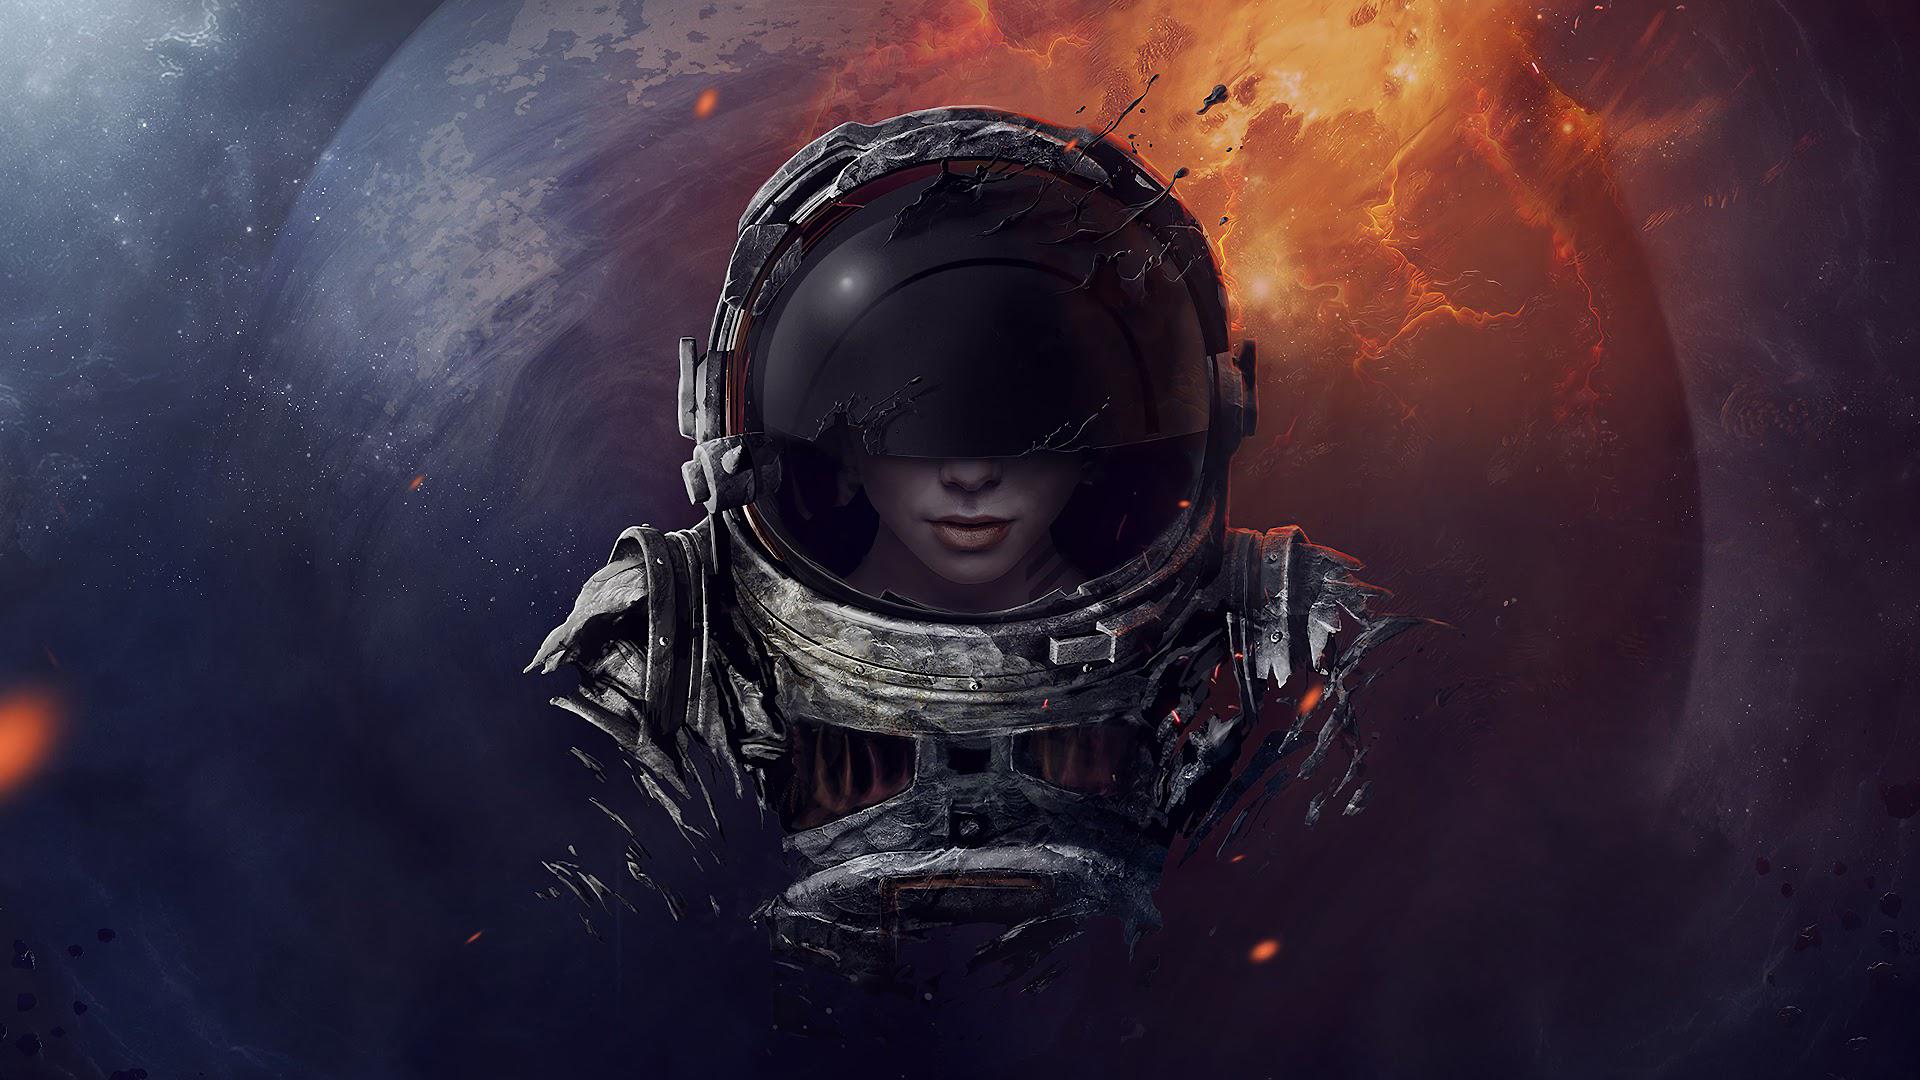 General 1920x1080 astronaut space fantasy art planet spacesuit abstract surreal digital art drawing helmet space art futuristic science fiction women science fiction artwork fictional character women frontal view visors